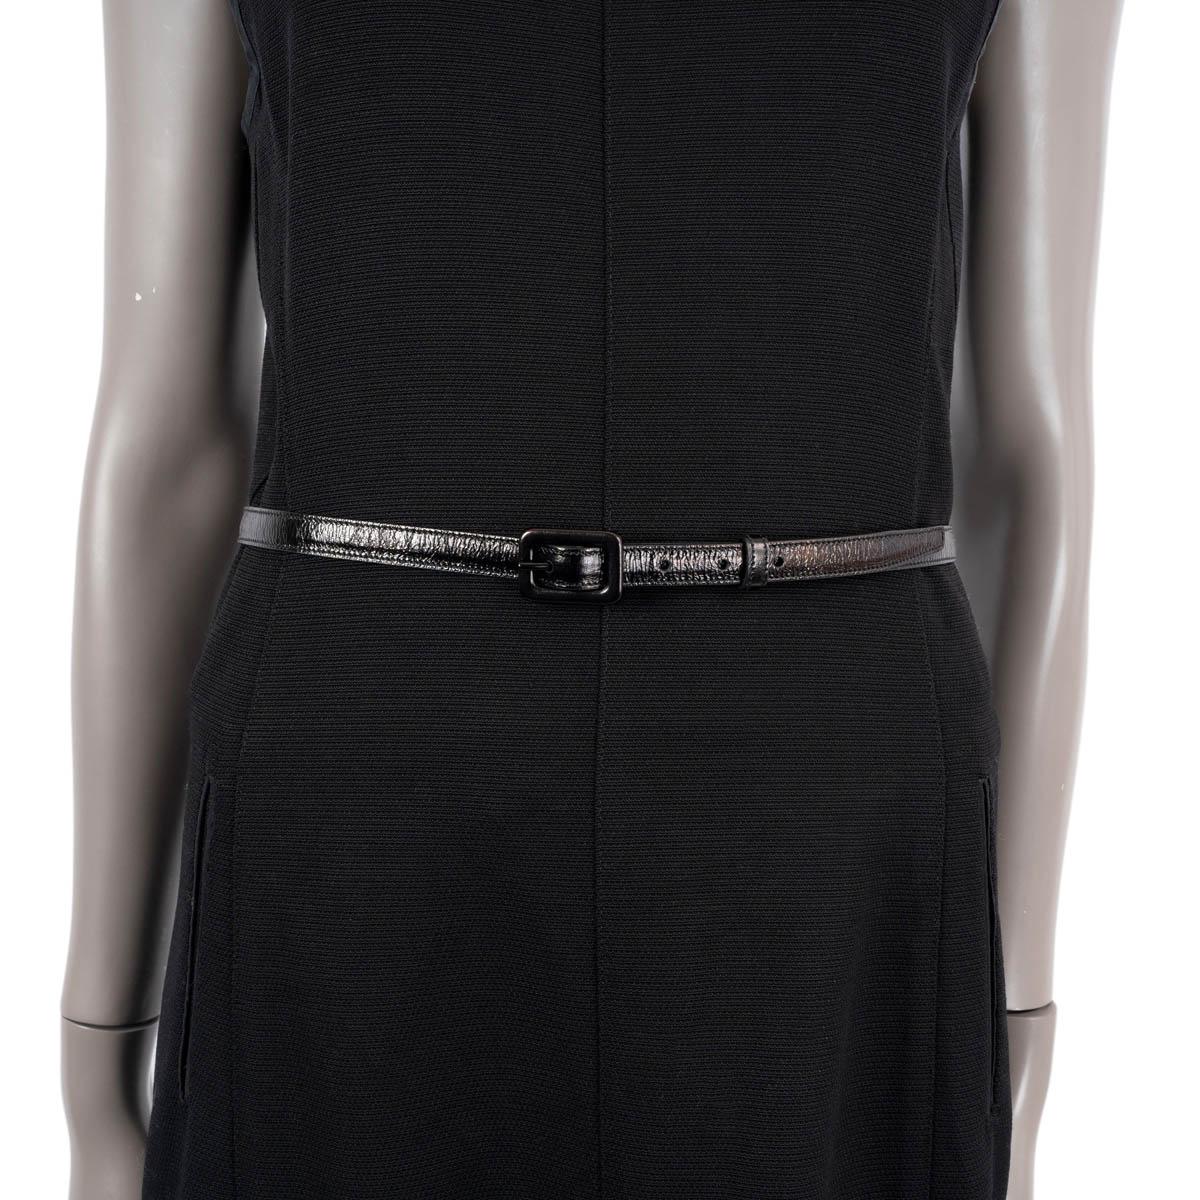 100% authentic Saint Laurent thin belt in black leather with a black buckle. Has been worn and is in excellent condition.


Measurements
Tag Size	80
Width	1.3cm (0.5in)
Fits	75cm (29.3in) to 83cm (32.4in)
Length	91cm (35.5in)
Buckle Size